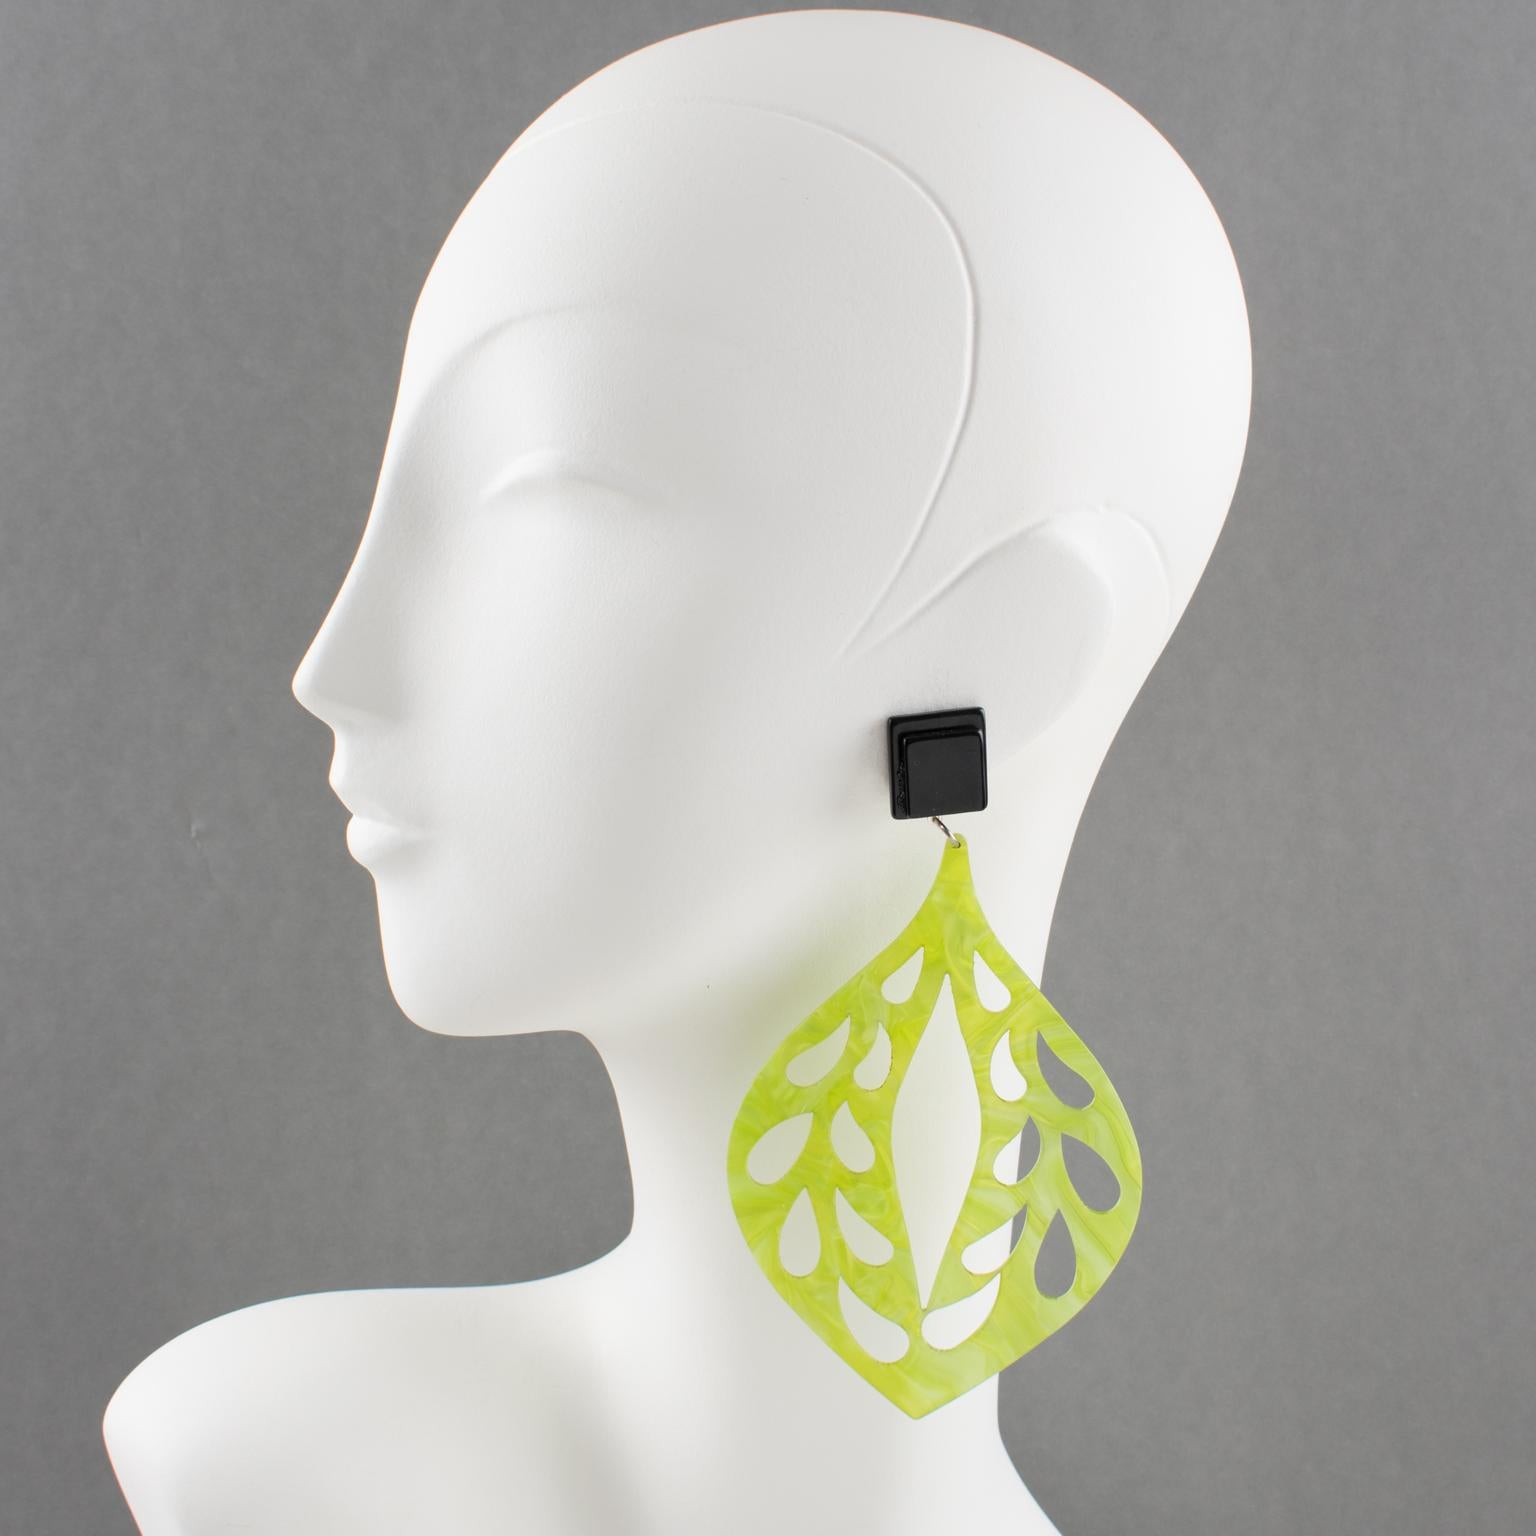 Spectacular Italian designer studio Lucite or resin dangling shoulder-duster clip-on earrings. Oversized drop shape all carved and see-thru in lime green color with a moon-glow textured pattern. Clip fittings in black color with a laminated pattern.